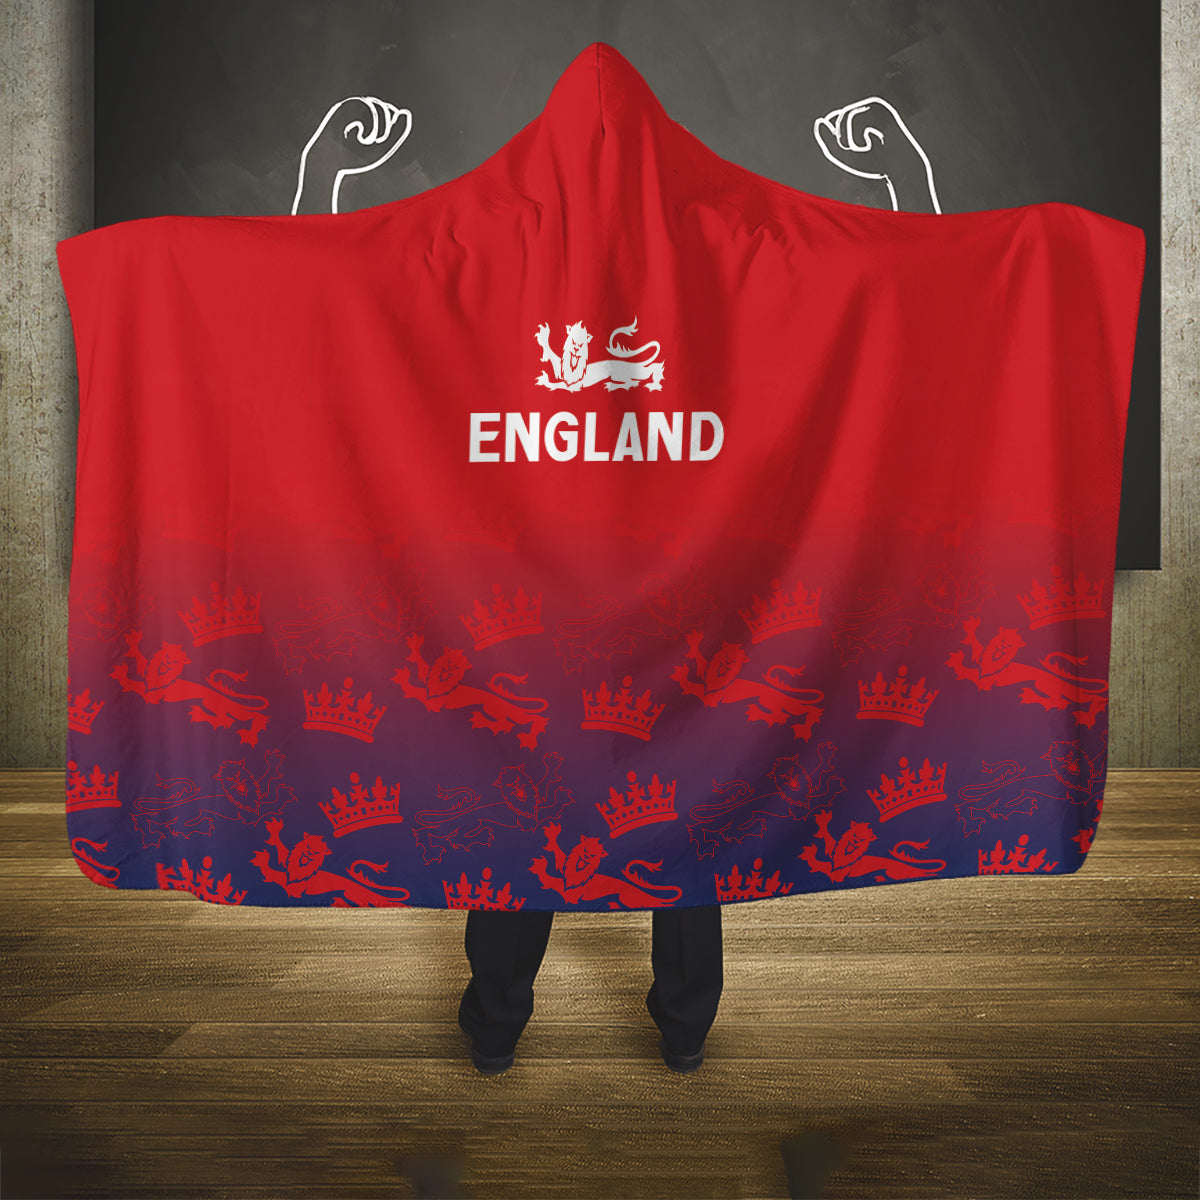 England Cricket World Cup 2025 Hooded Blanket Seamless Inspiration